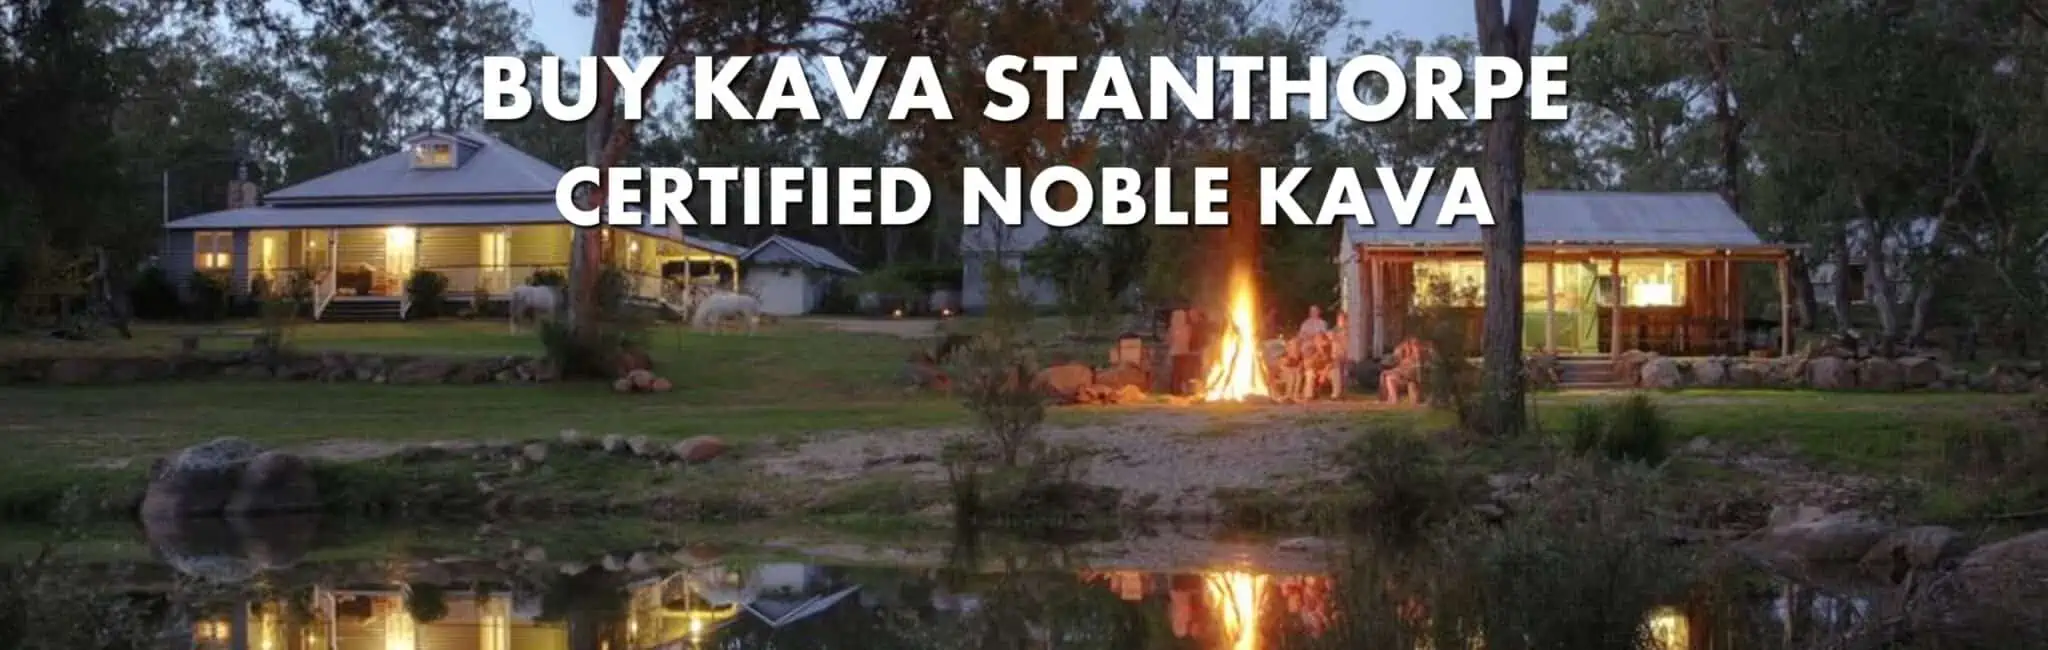 Night scene on river's edge in Stanthorpe Queensland with caption Buy Kava Stanthorpe Certified Noble Kava